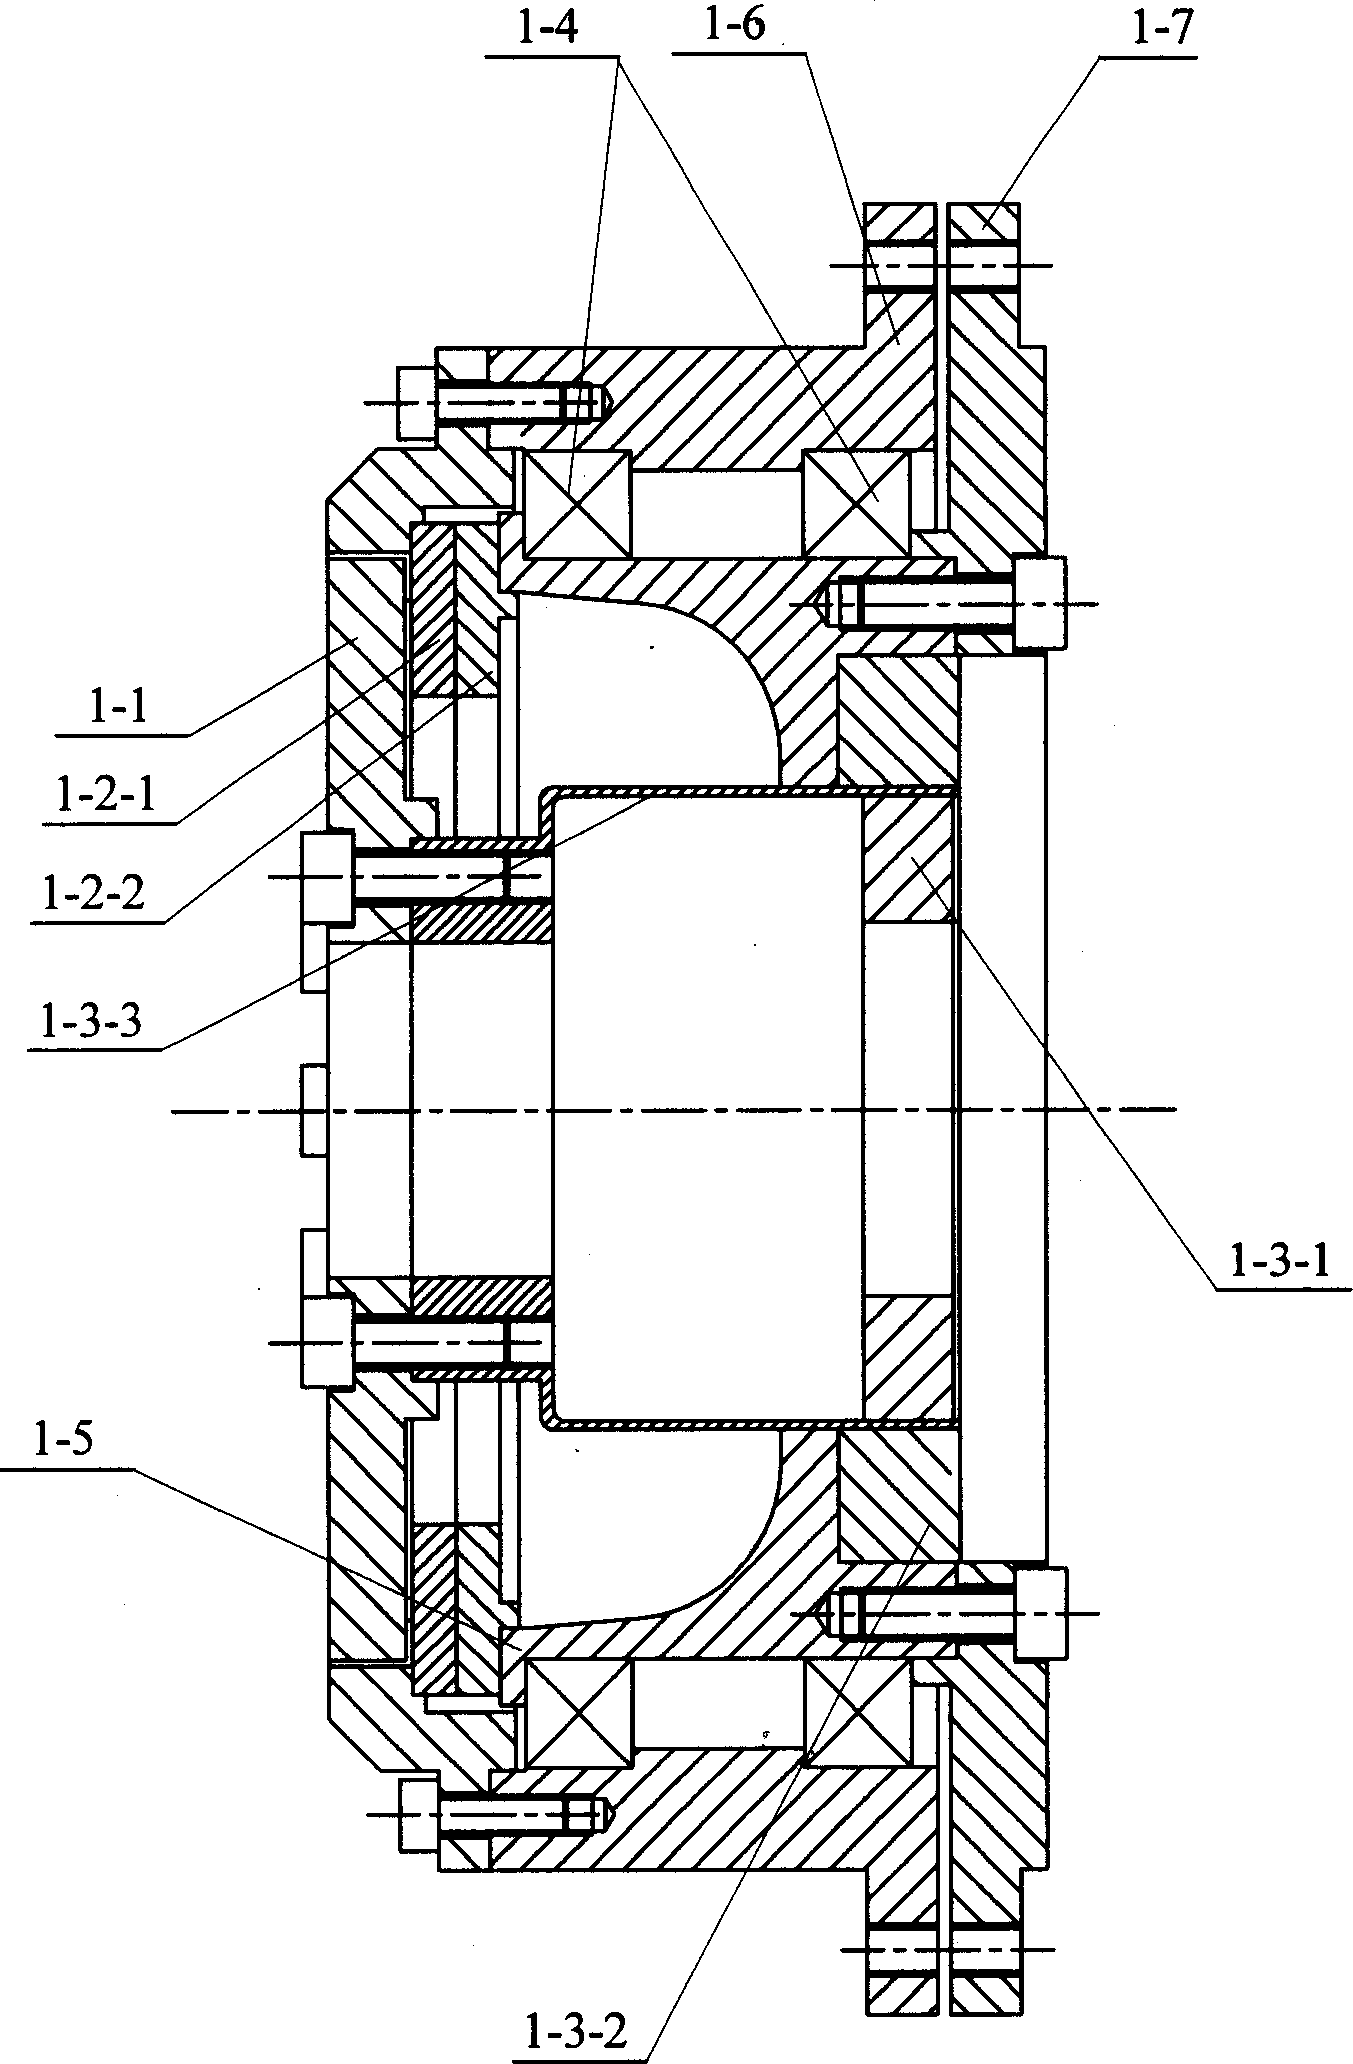 Modularized joint of space manipulator